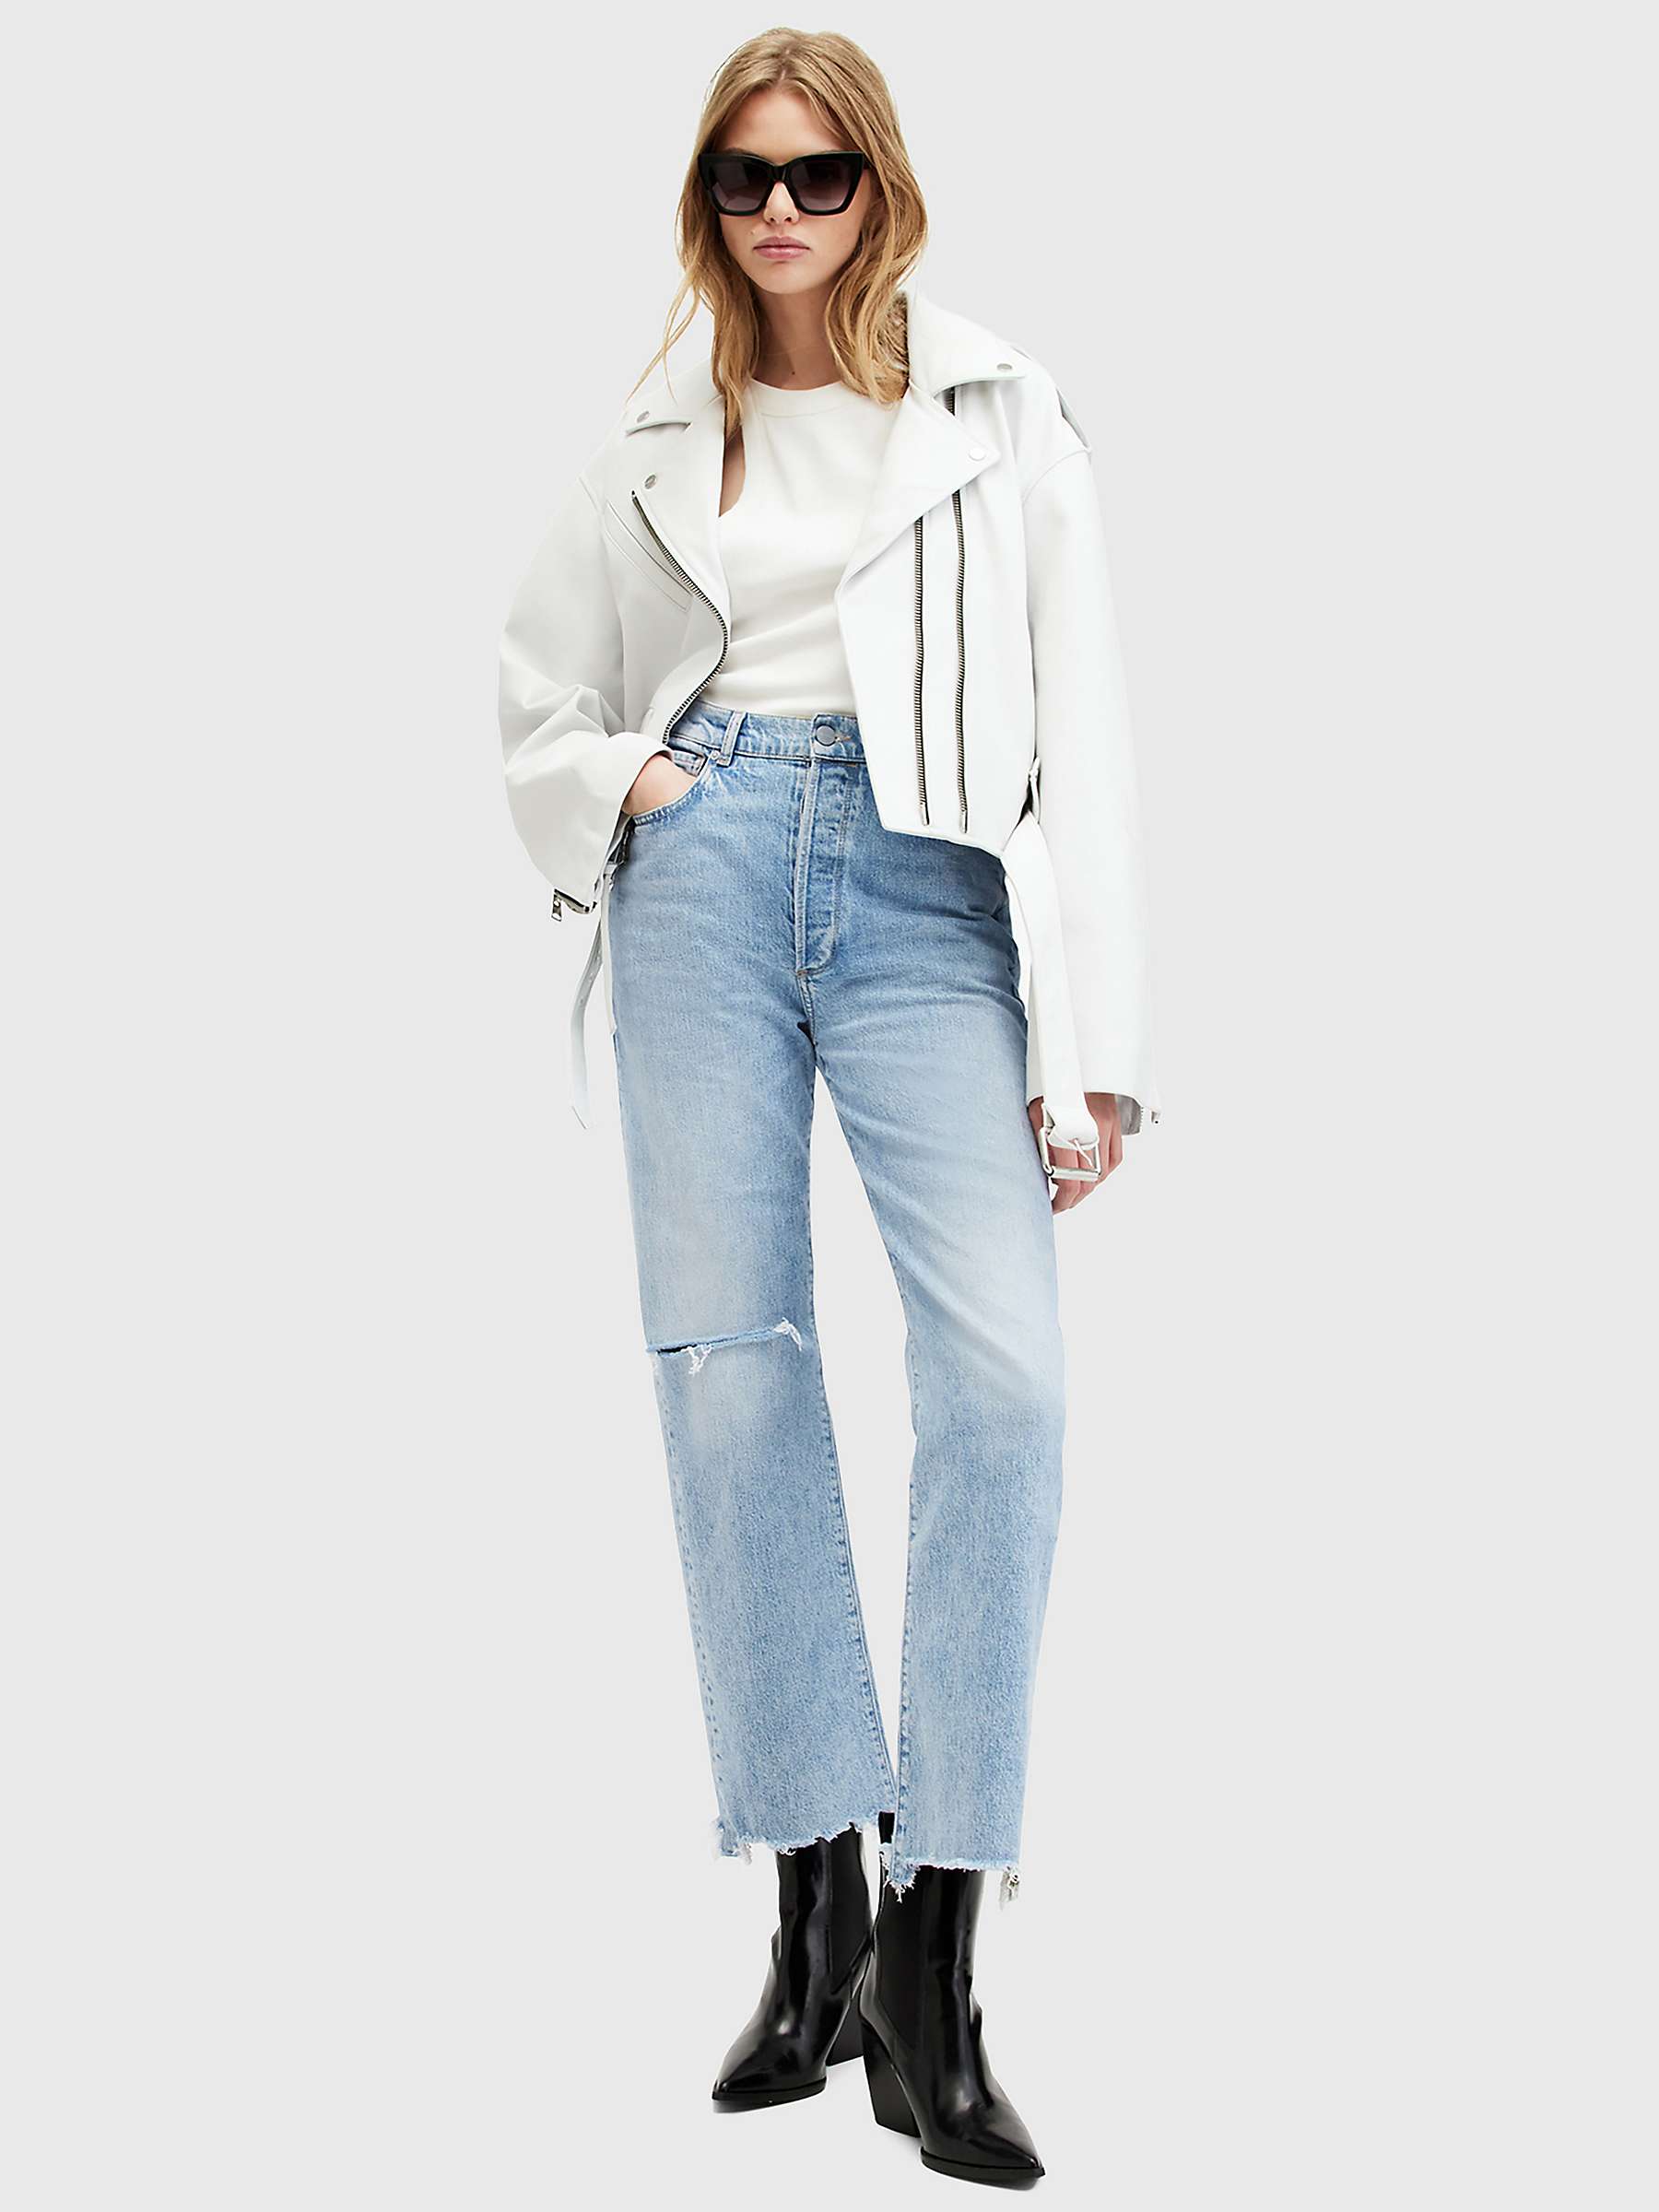 Buy AllSaints Edie High Rise Ripped Straight Jeans, Light Indigo Online at johnlewis.com